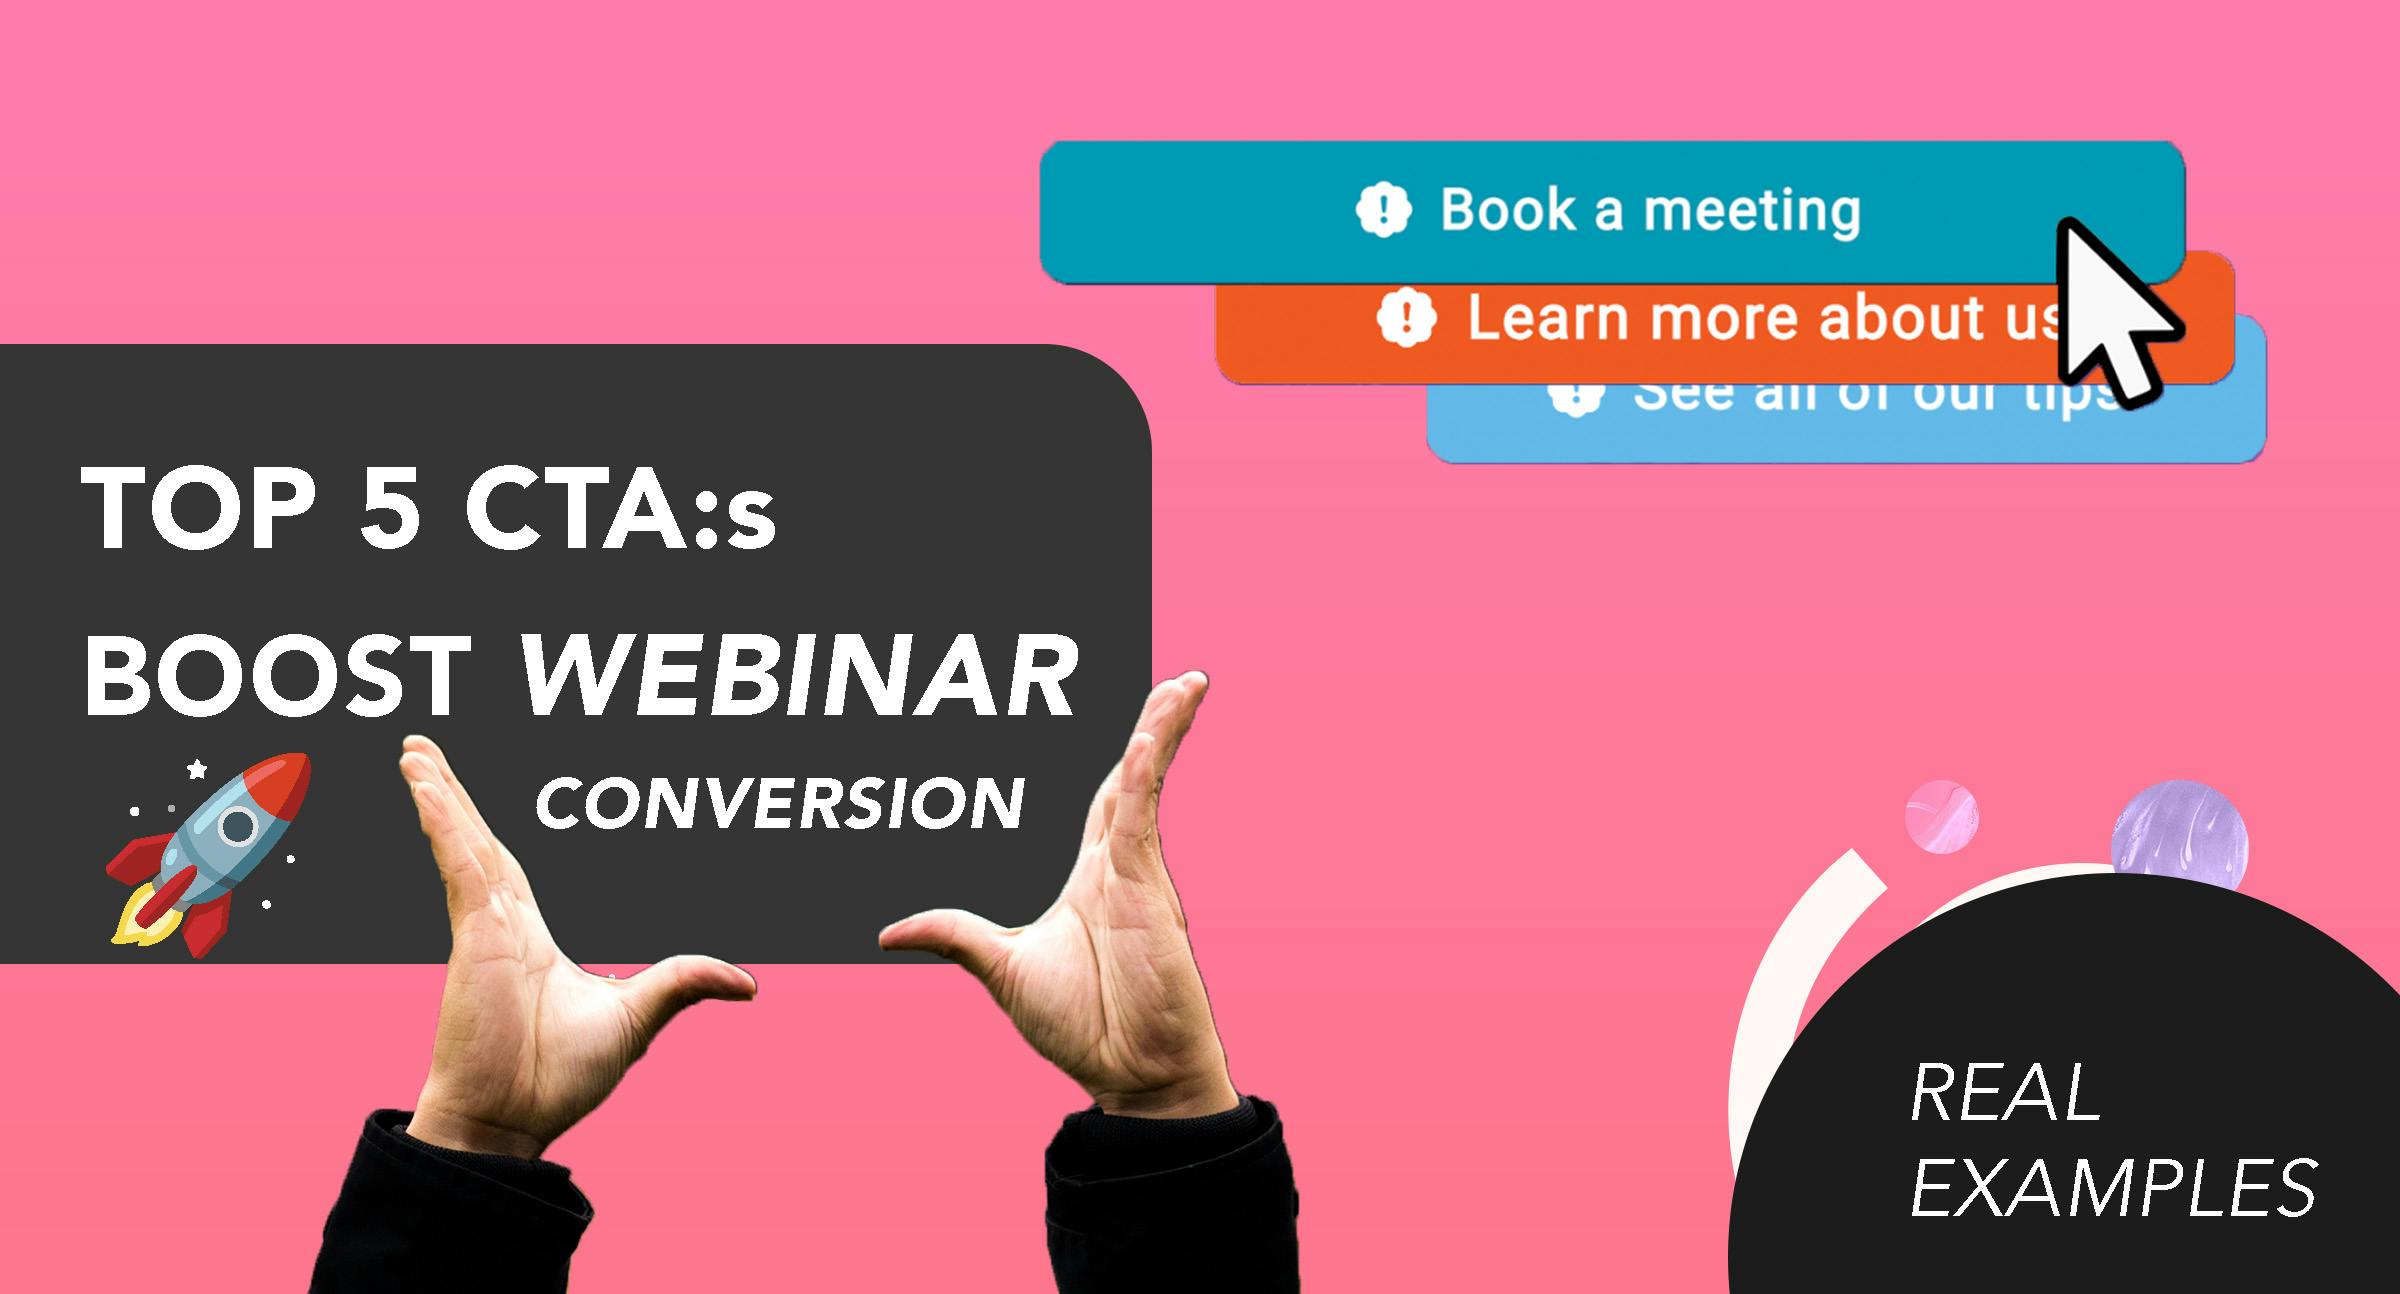 Boost webinar conversion rate with the best CTA:s